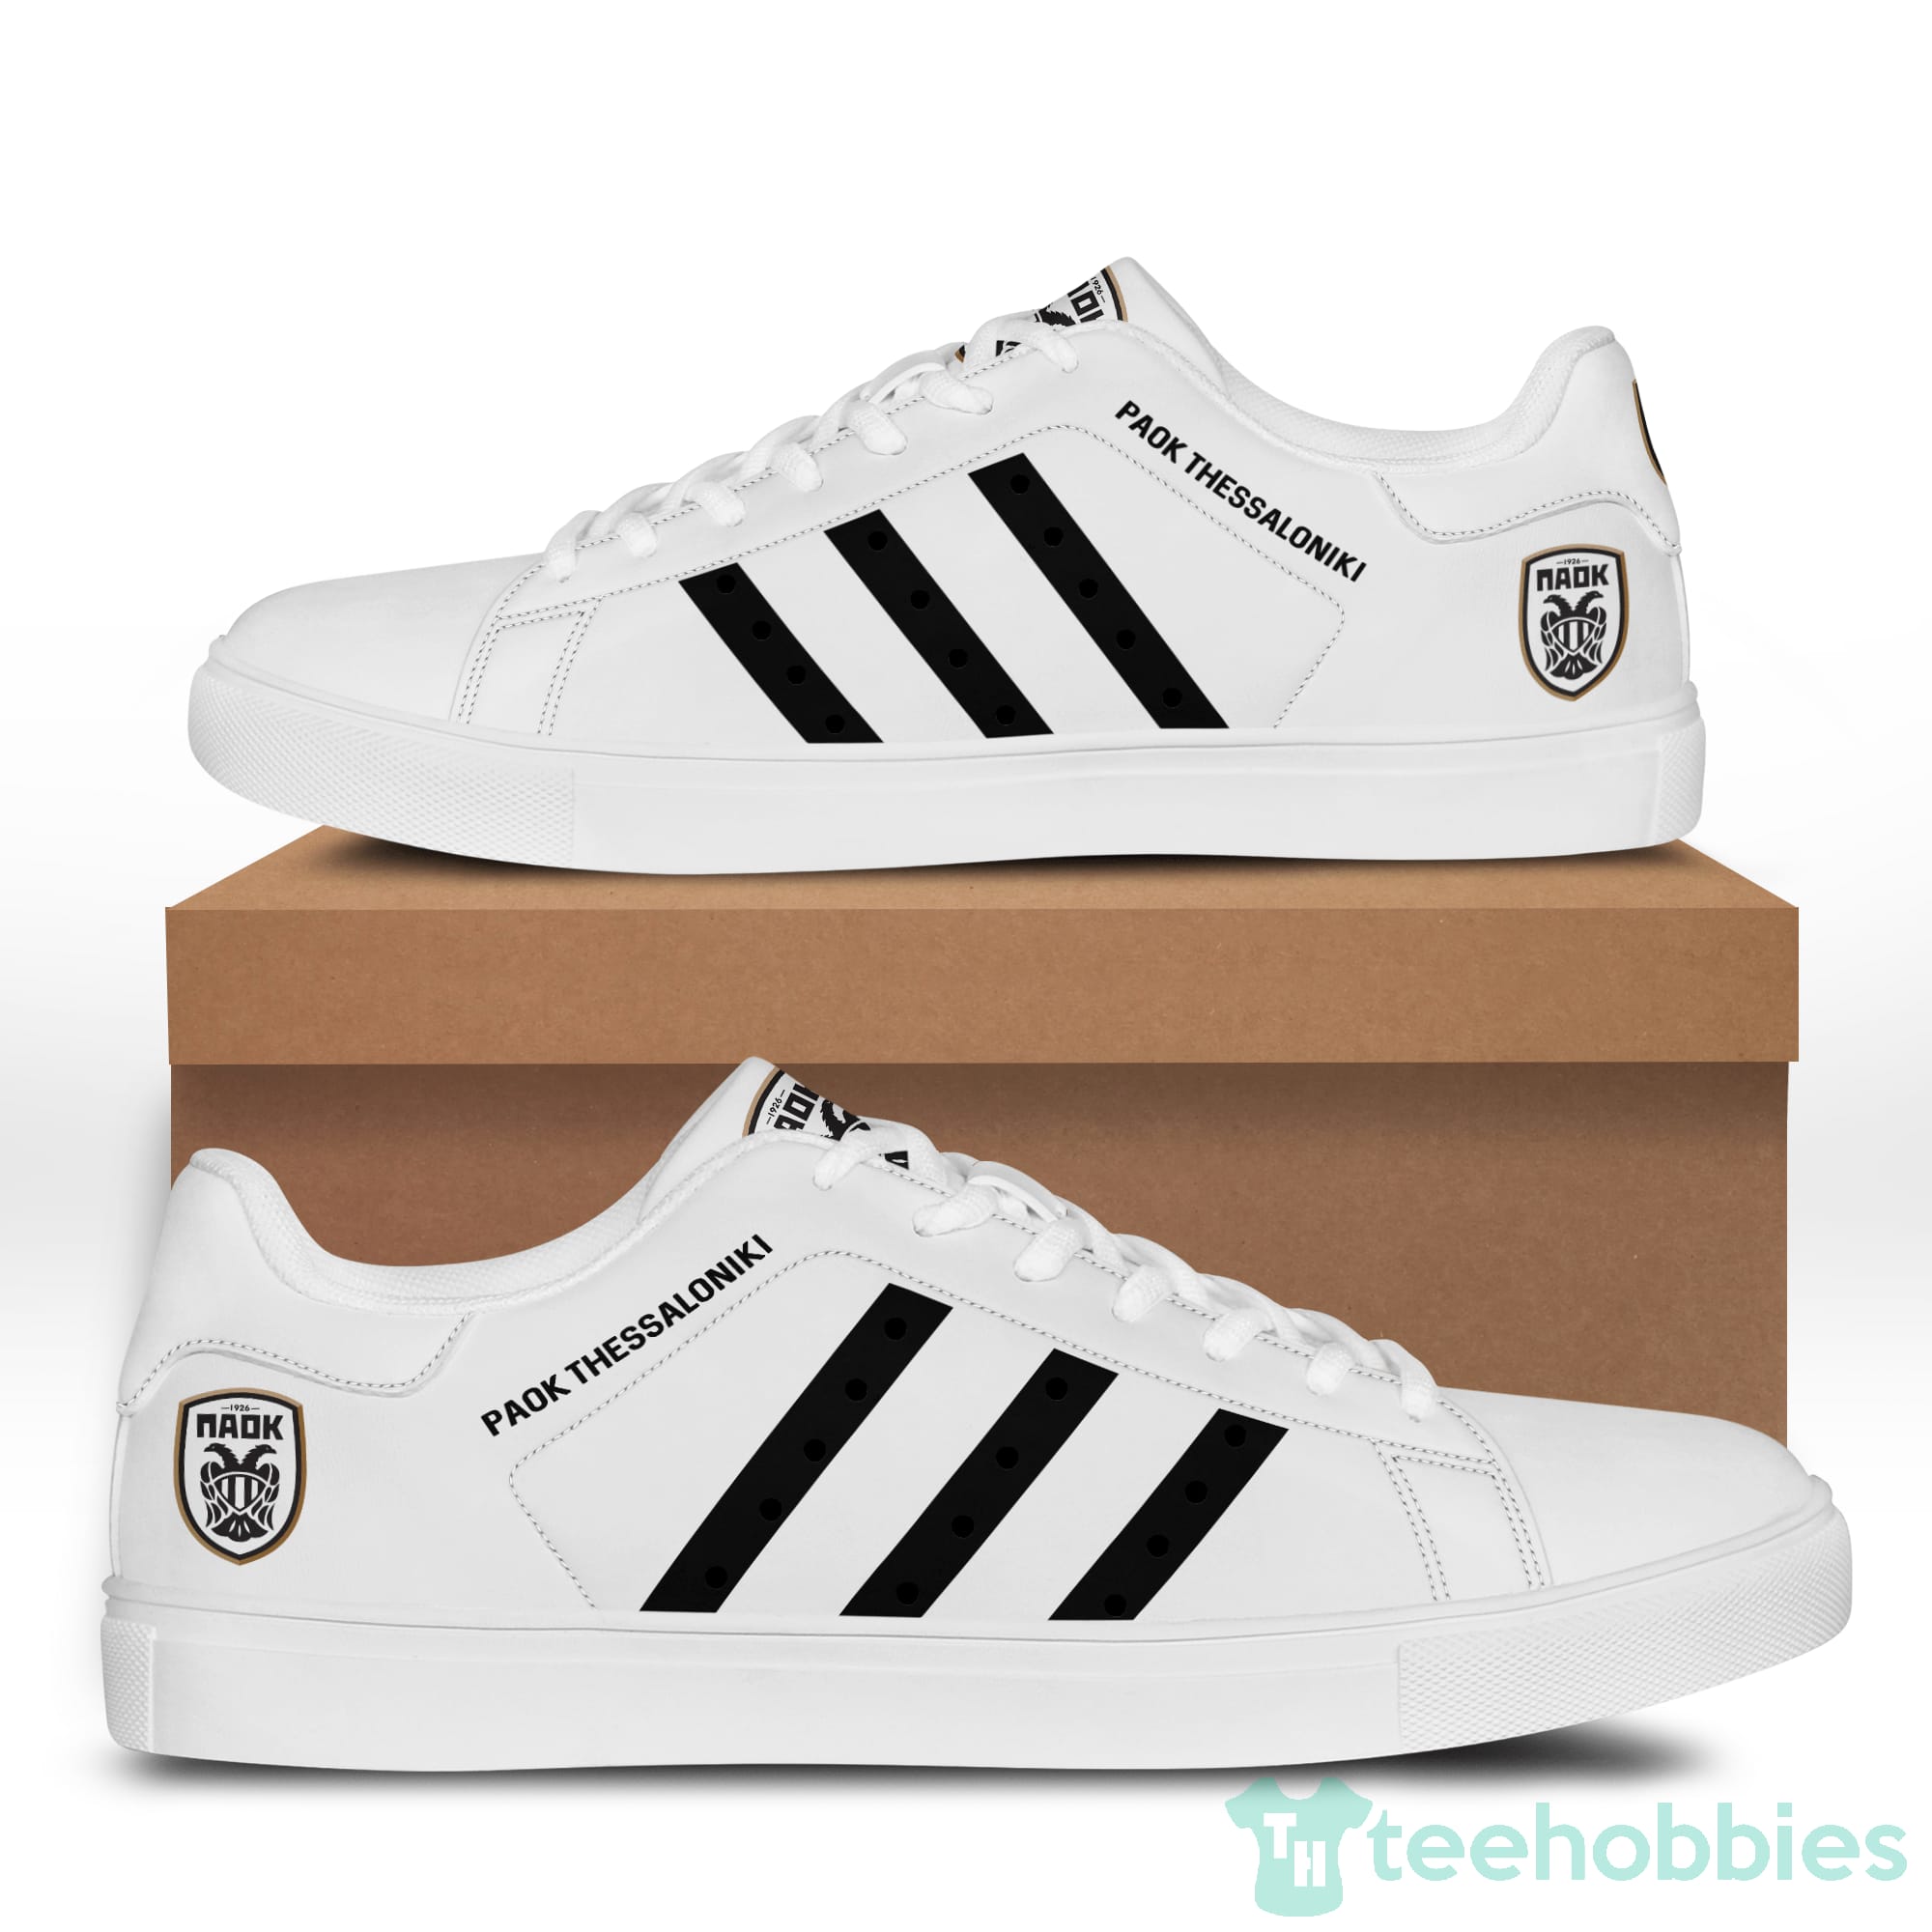 Paok Thessaloni Fc White Low Top Skate Shoes Product photo 1